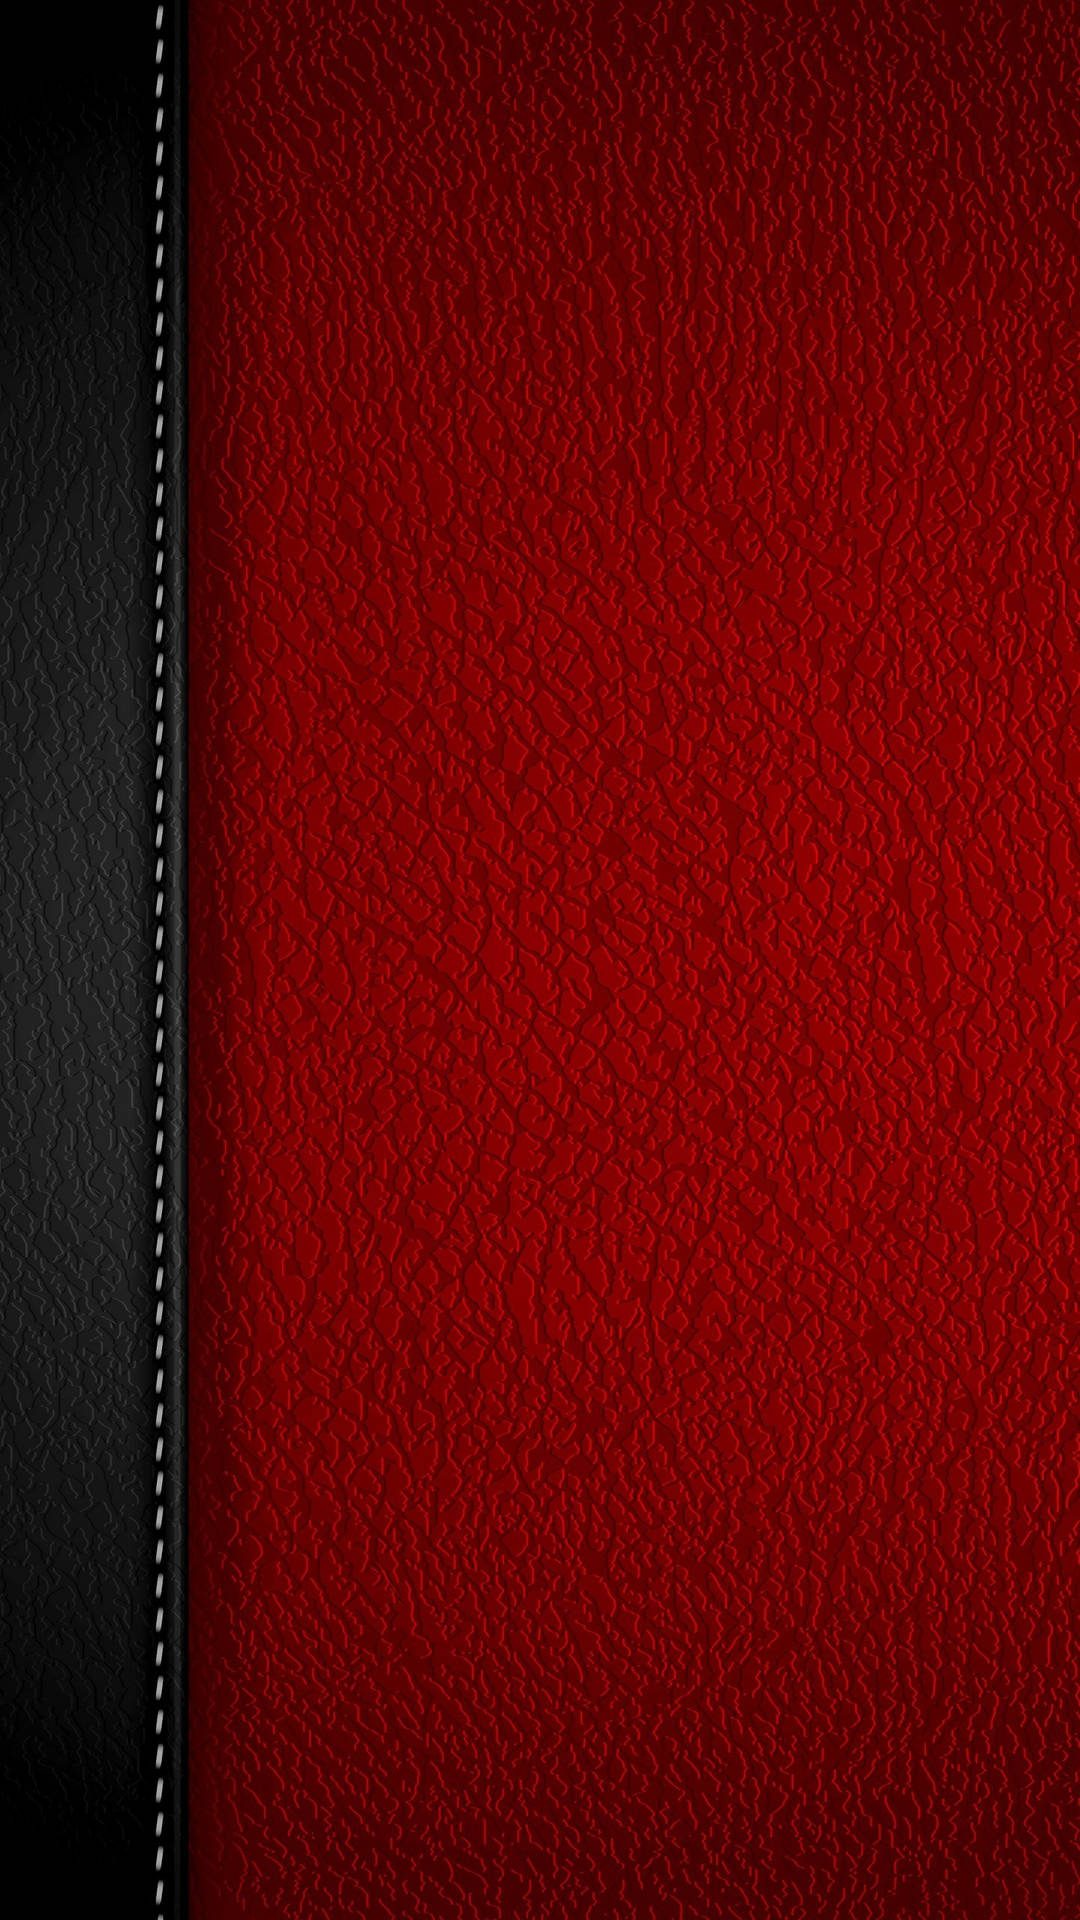 Htc Red Leather Background